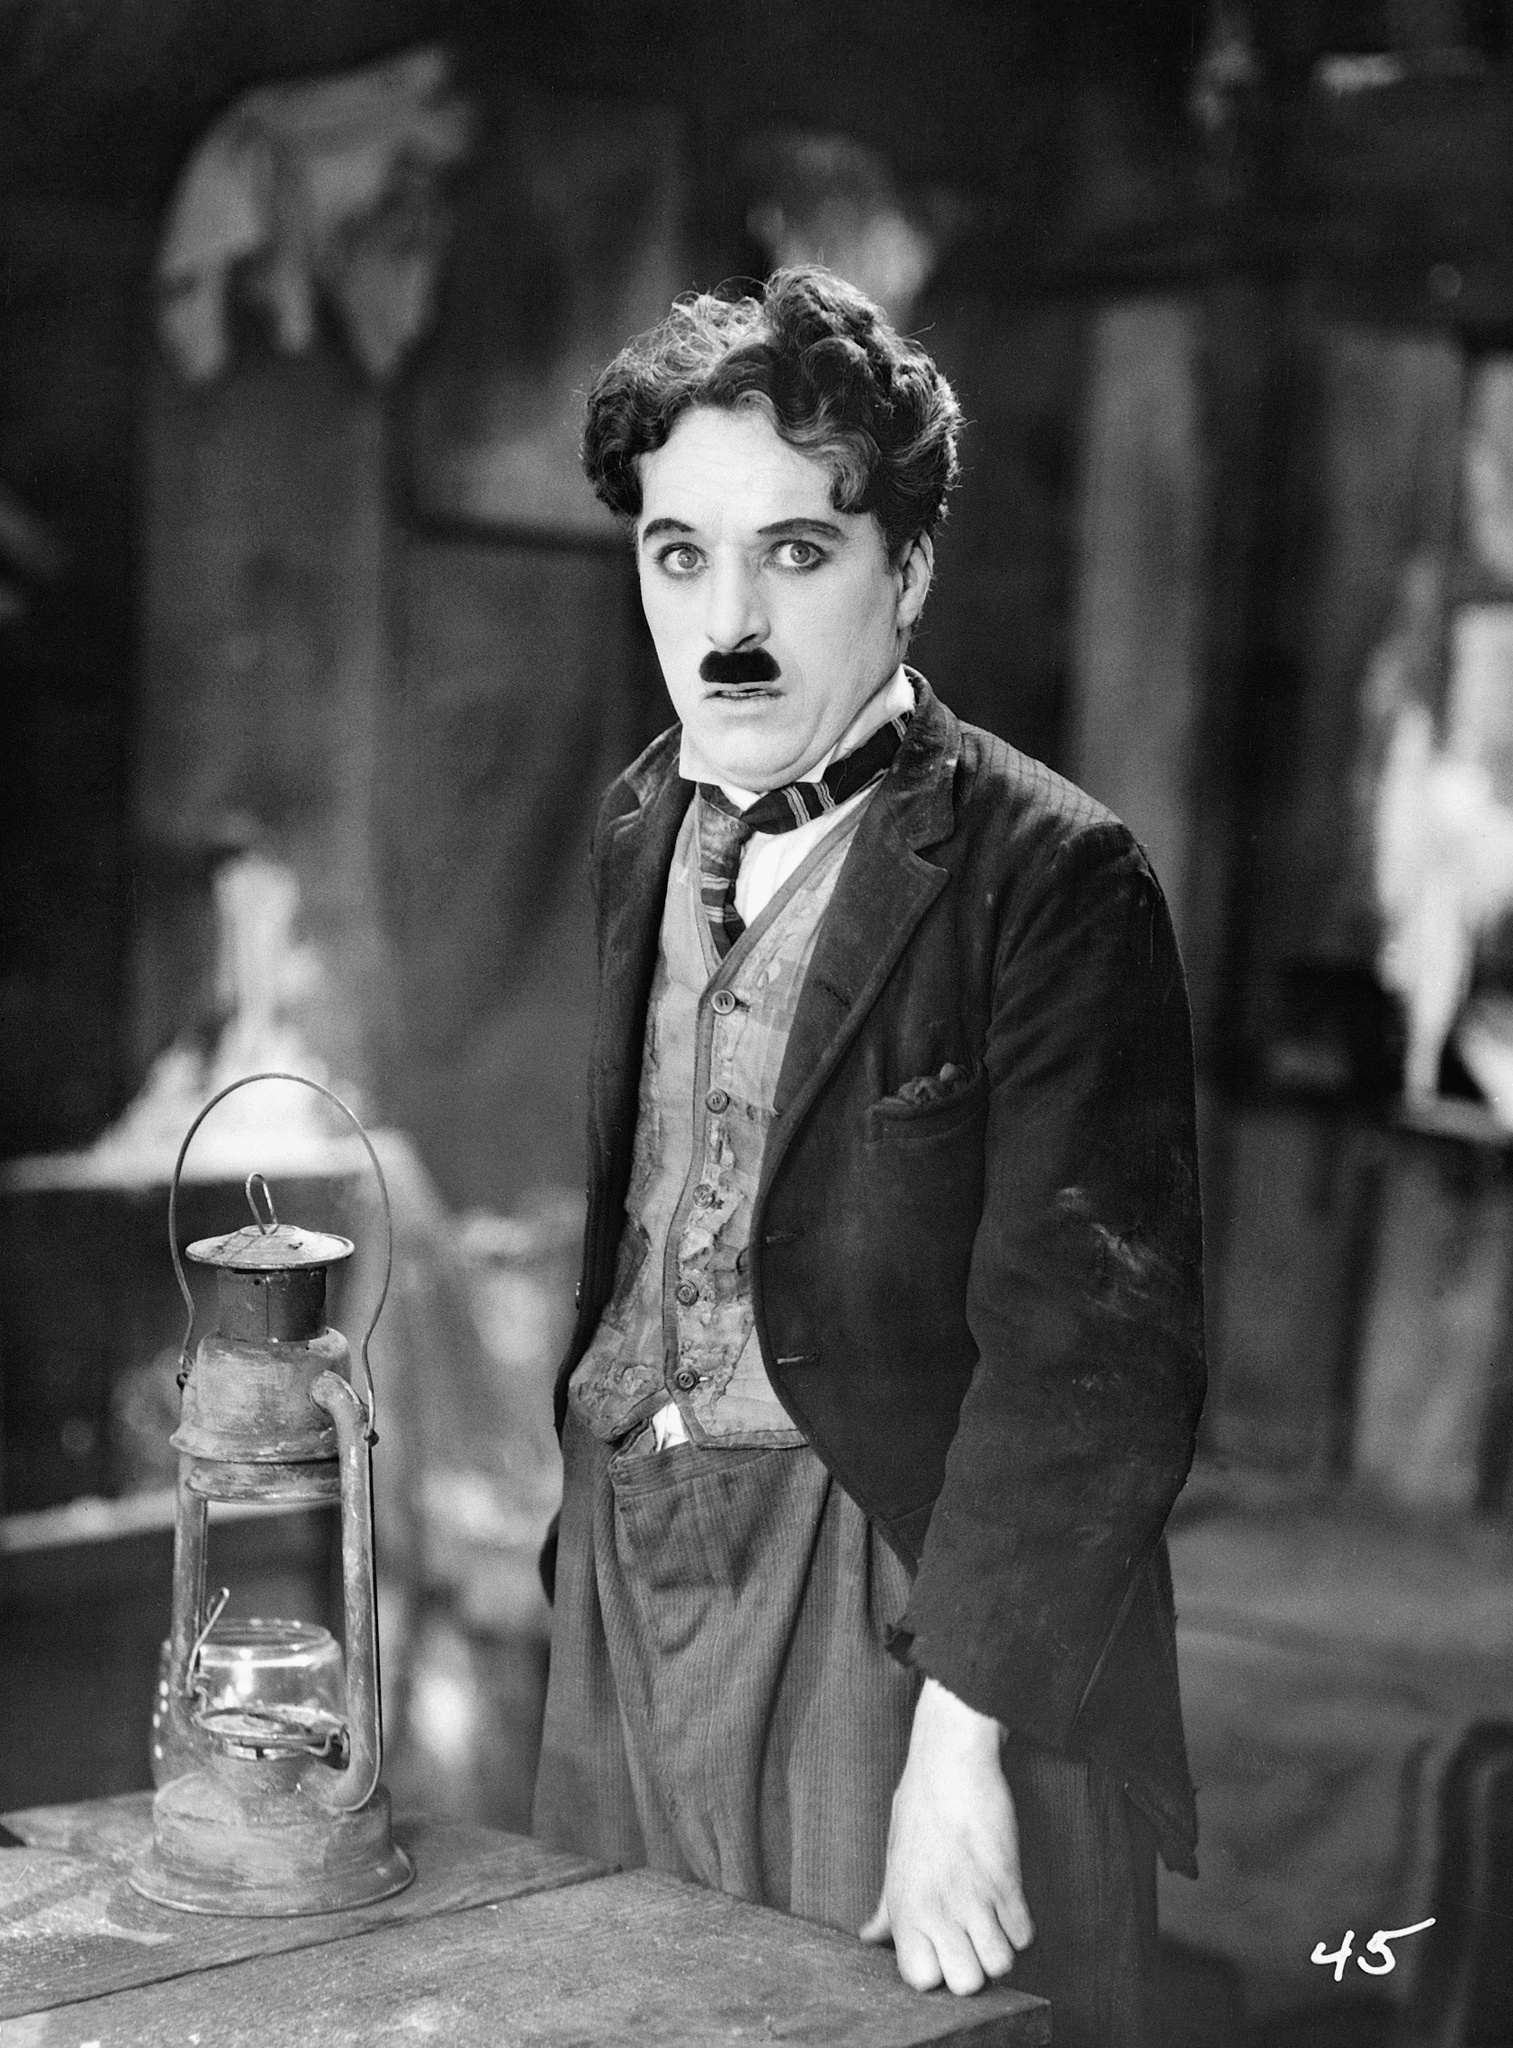 Still of Charles Chaplin in The Gold Rush (1925)